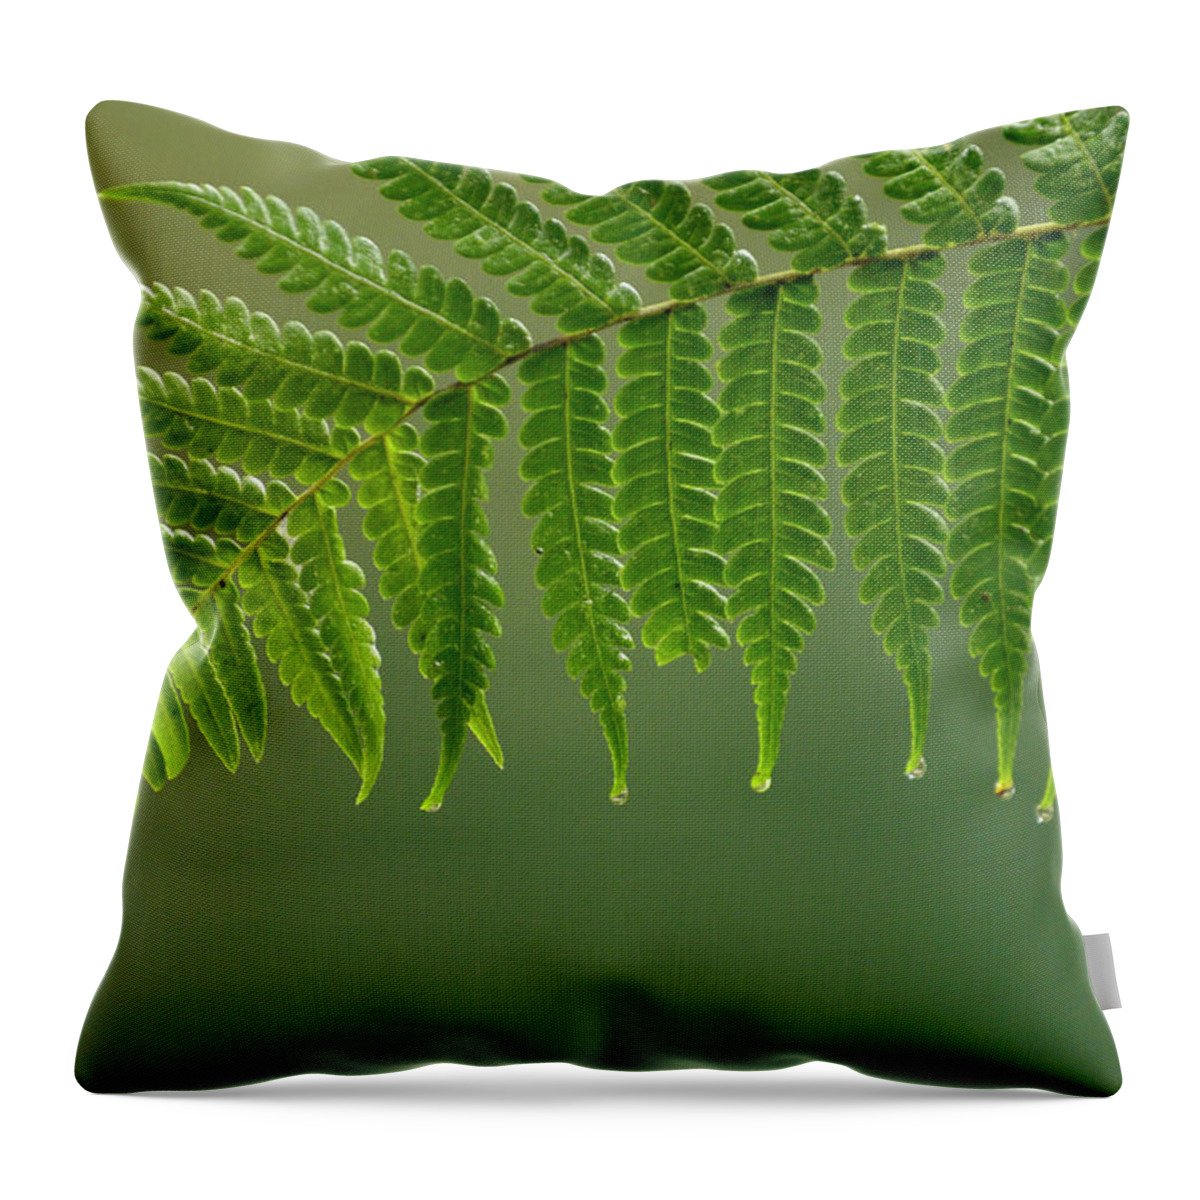 00210468 Throw Pillow featuring the photograph Fern Frond With Drip Tips by Pete Oxford